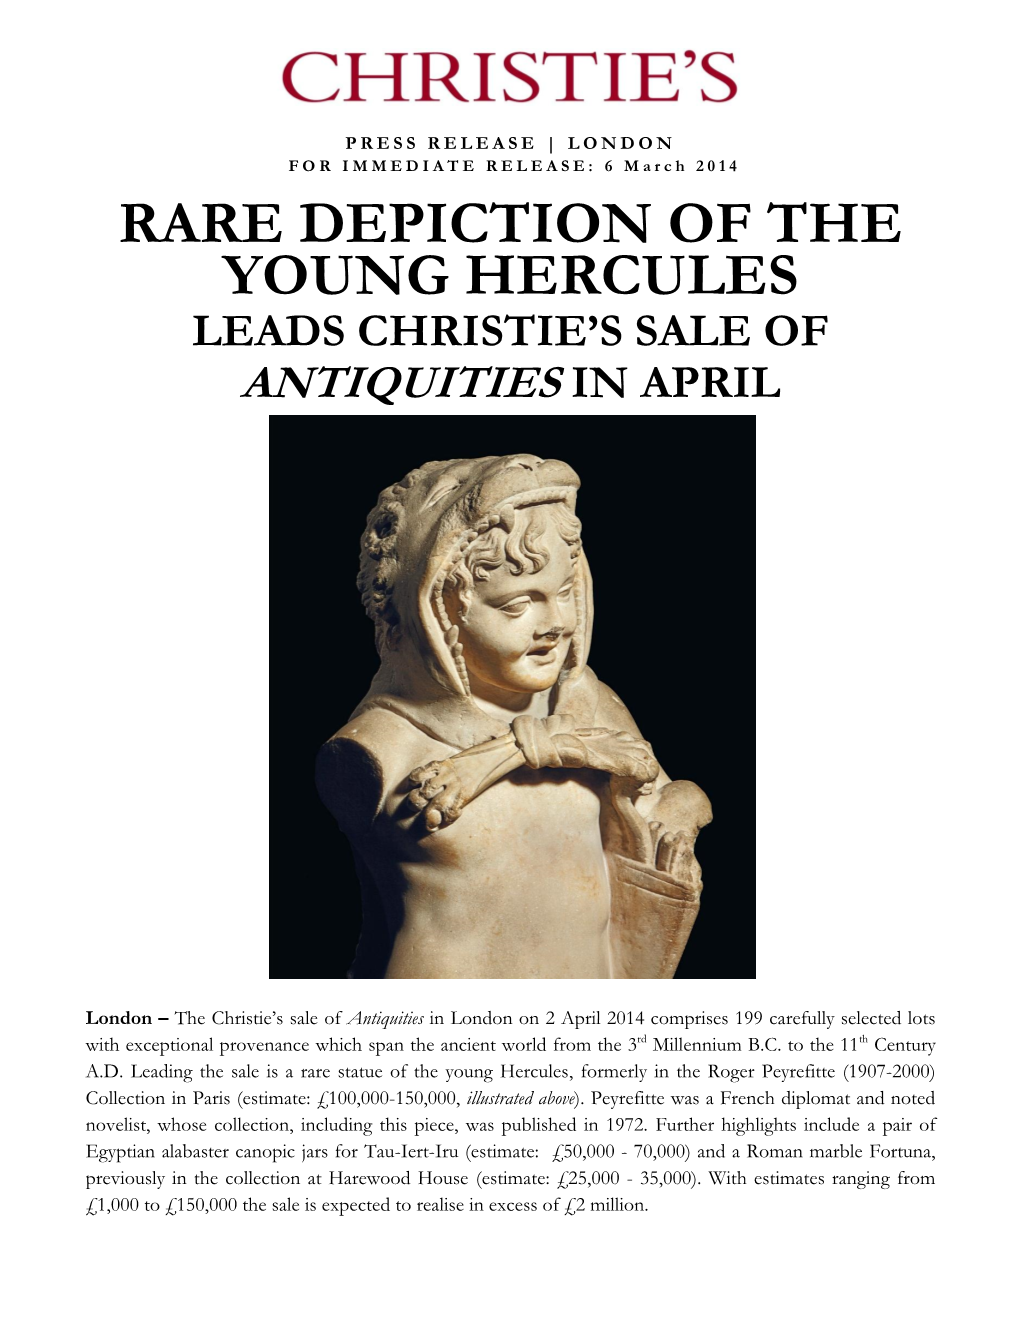 Rare Depiction of the Young Hercules Leads Christie’S Sale of Antiquities in April